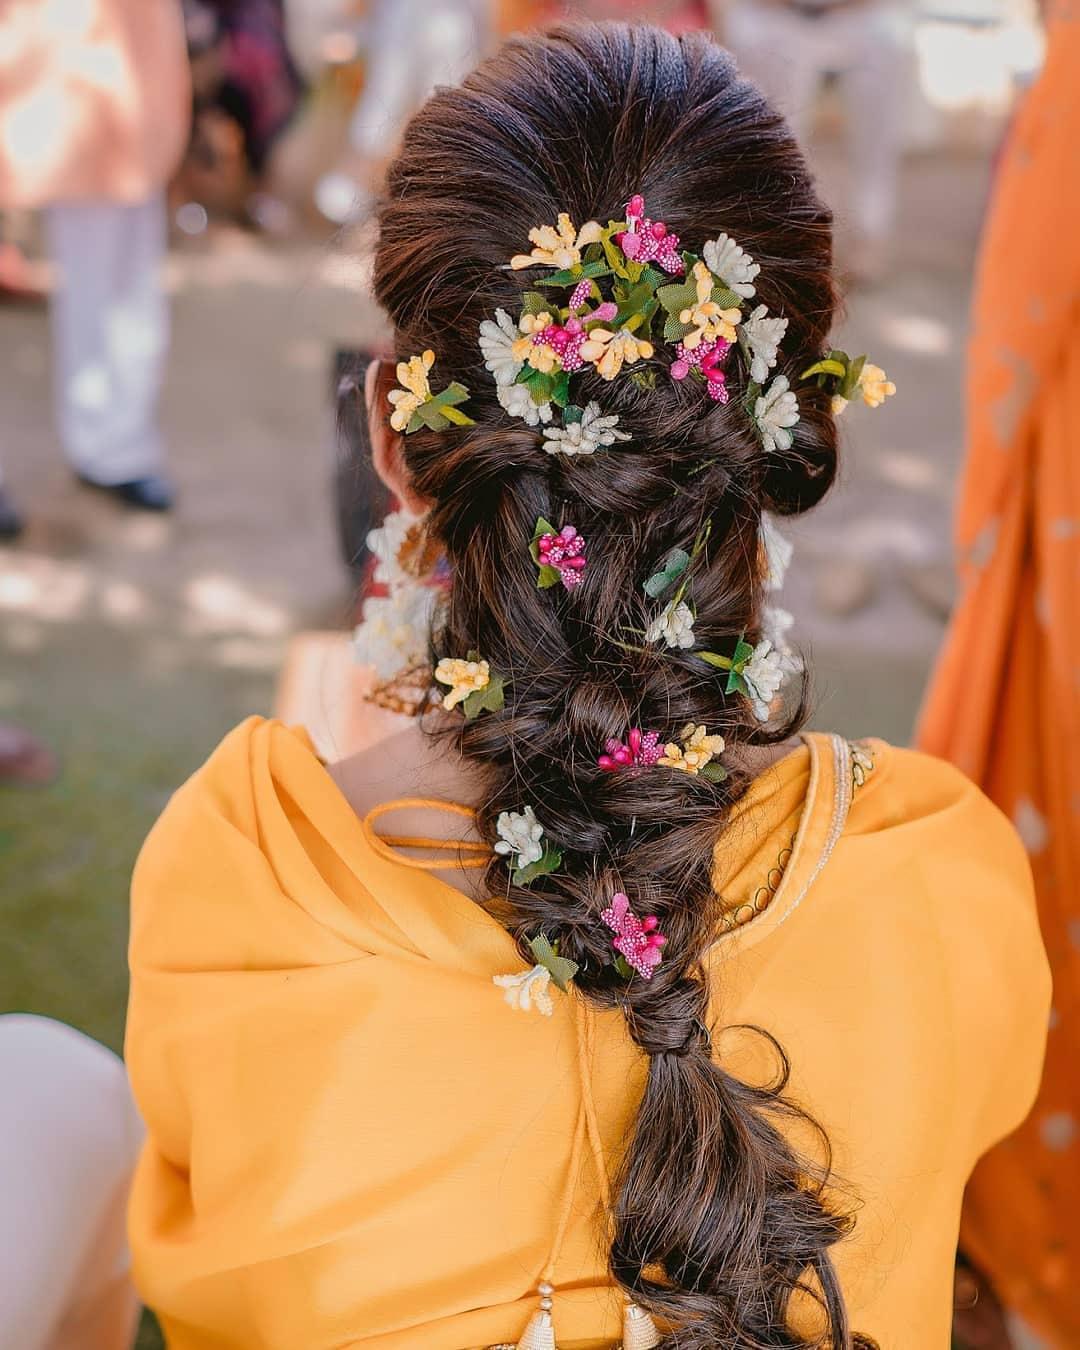 15 Statement Accessories To Glam Up Your Simple Bridal Hairstyles |  WeddingBazaar